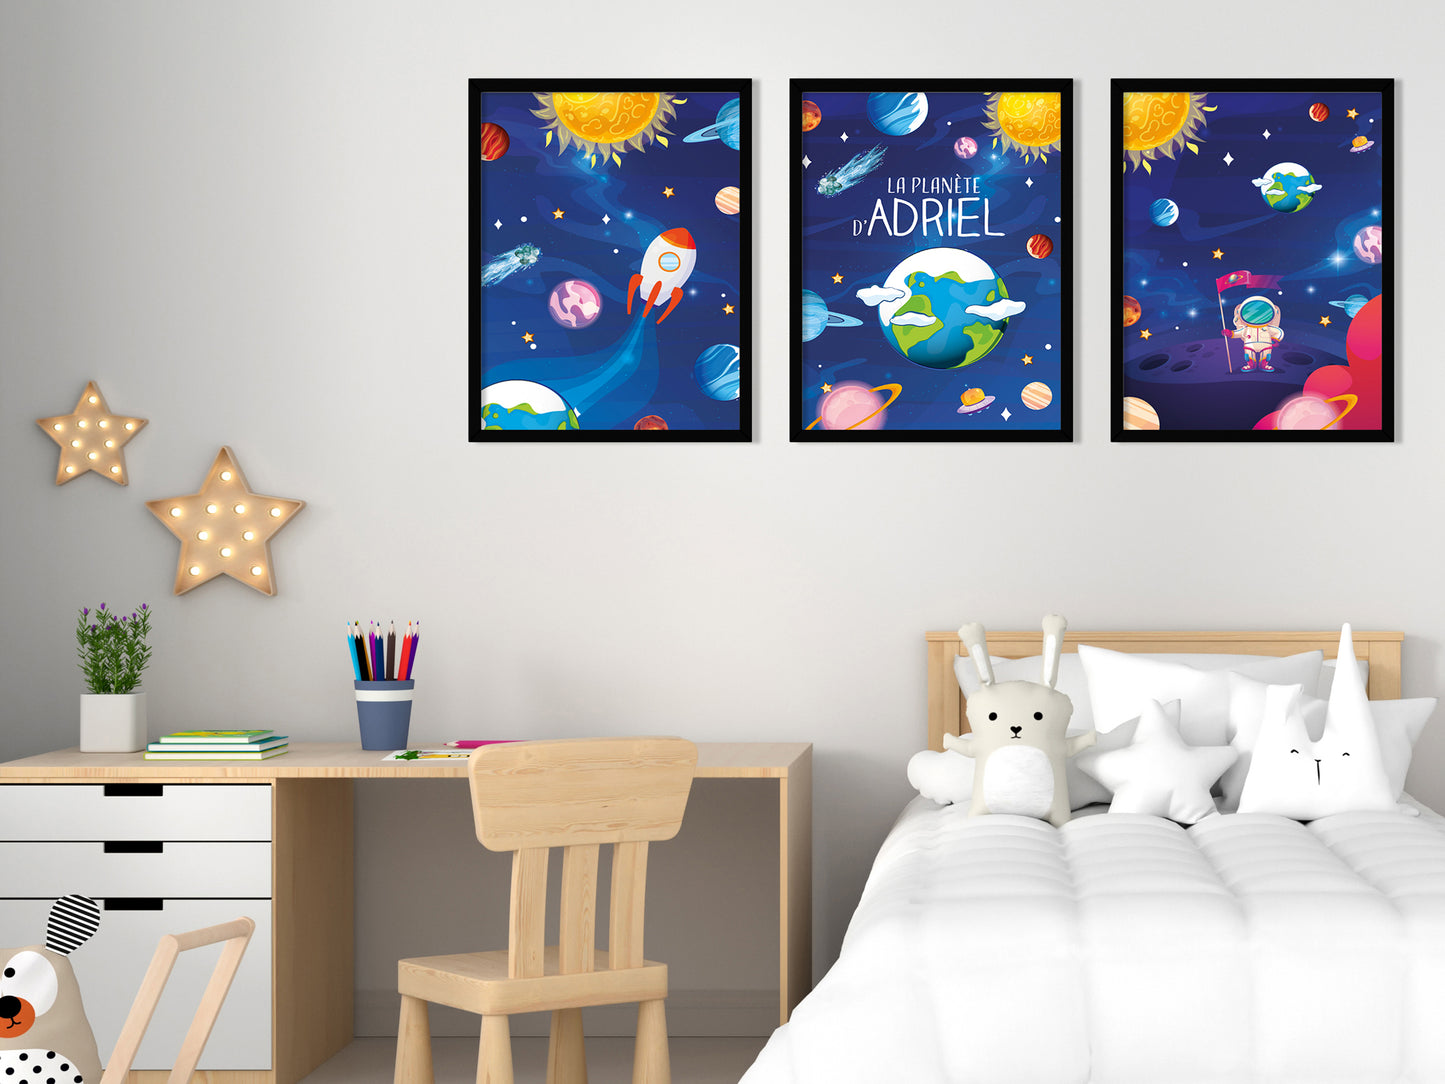 Space posters personalized children's room - Decoration 3 posters boy girl - Space - Gift idea Astronaut Cosmonaut Printing A4 A3